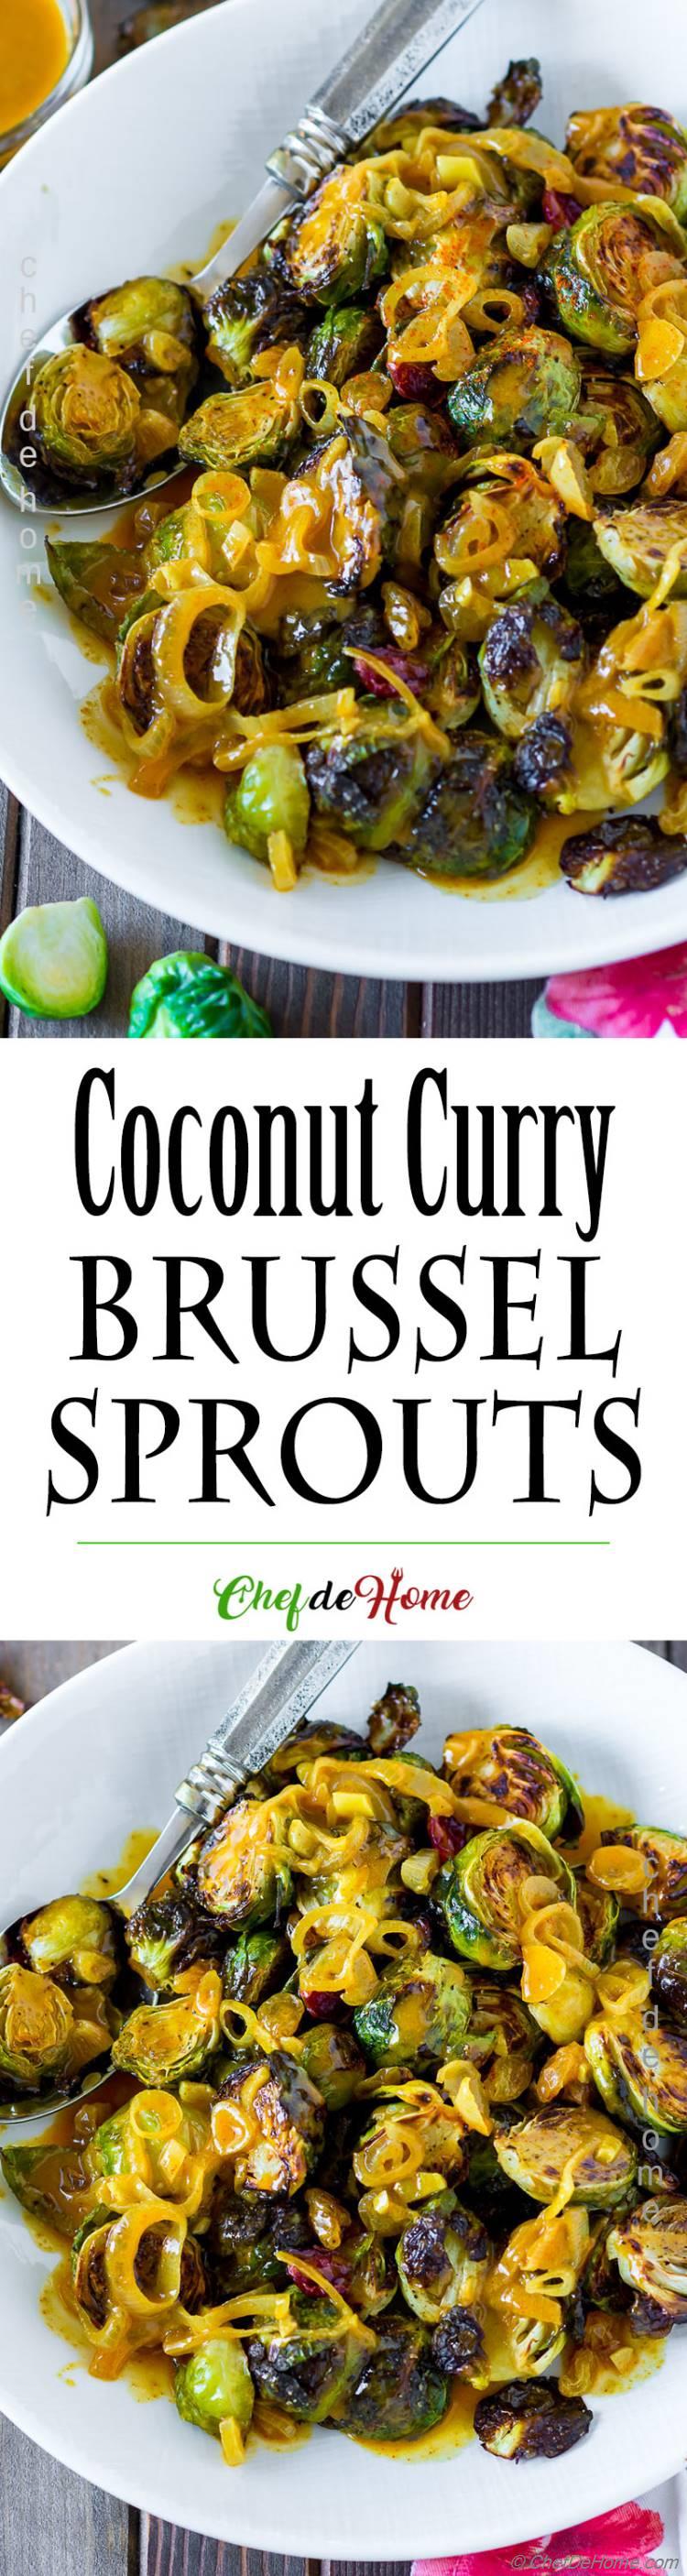 Delicious Roasted Brussel Sprouts with Coconut Curry Sauce